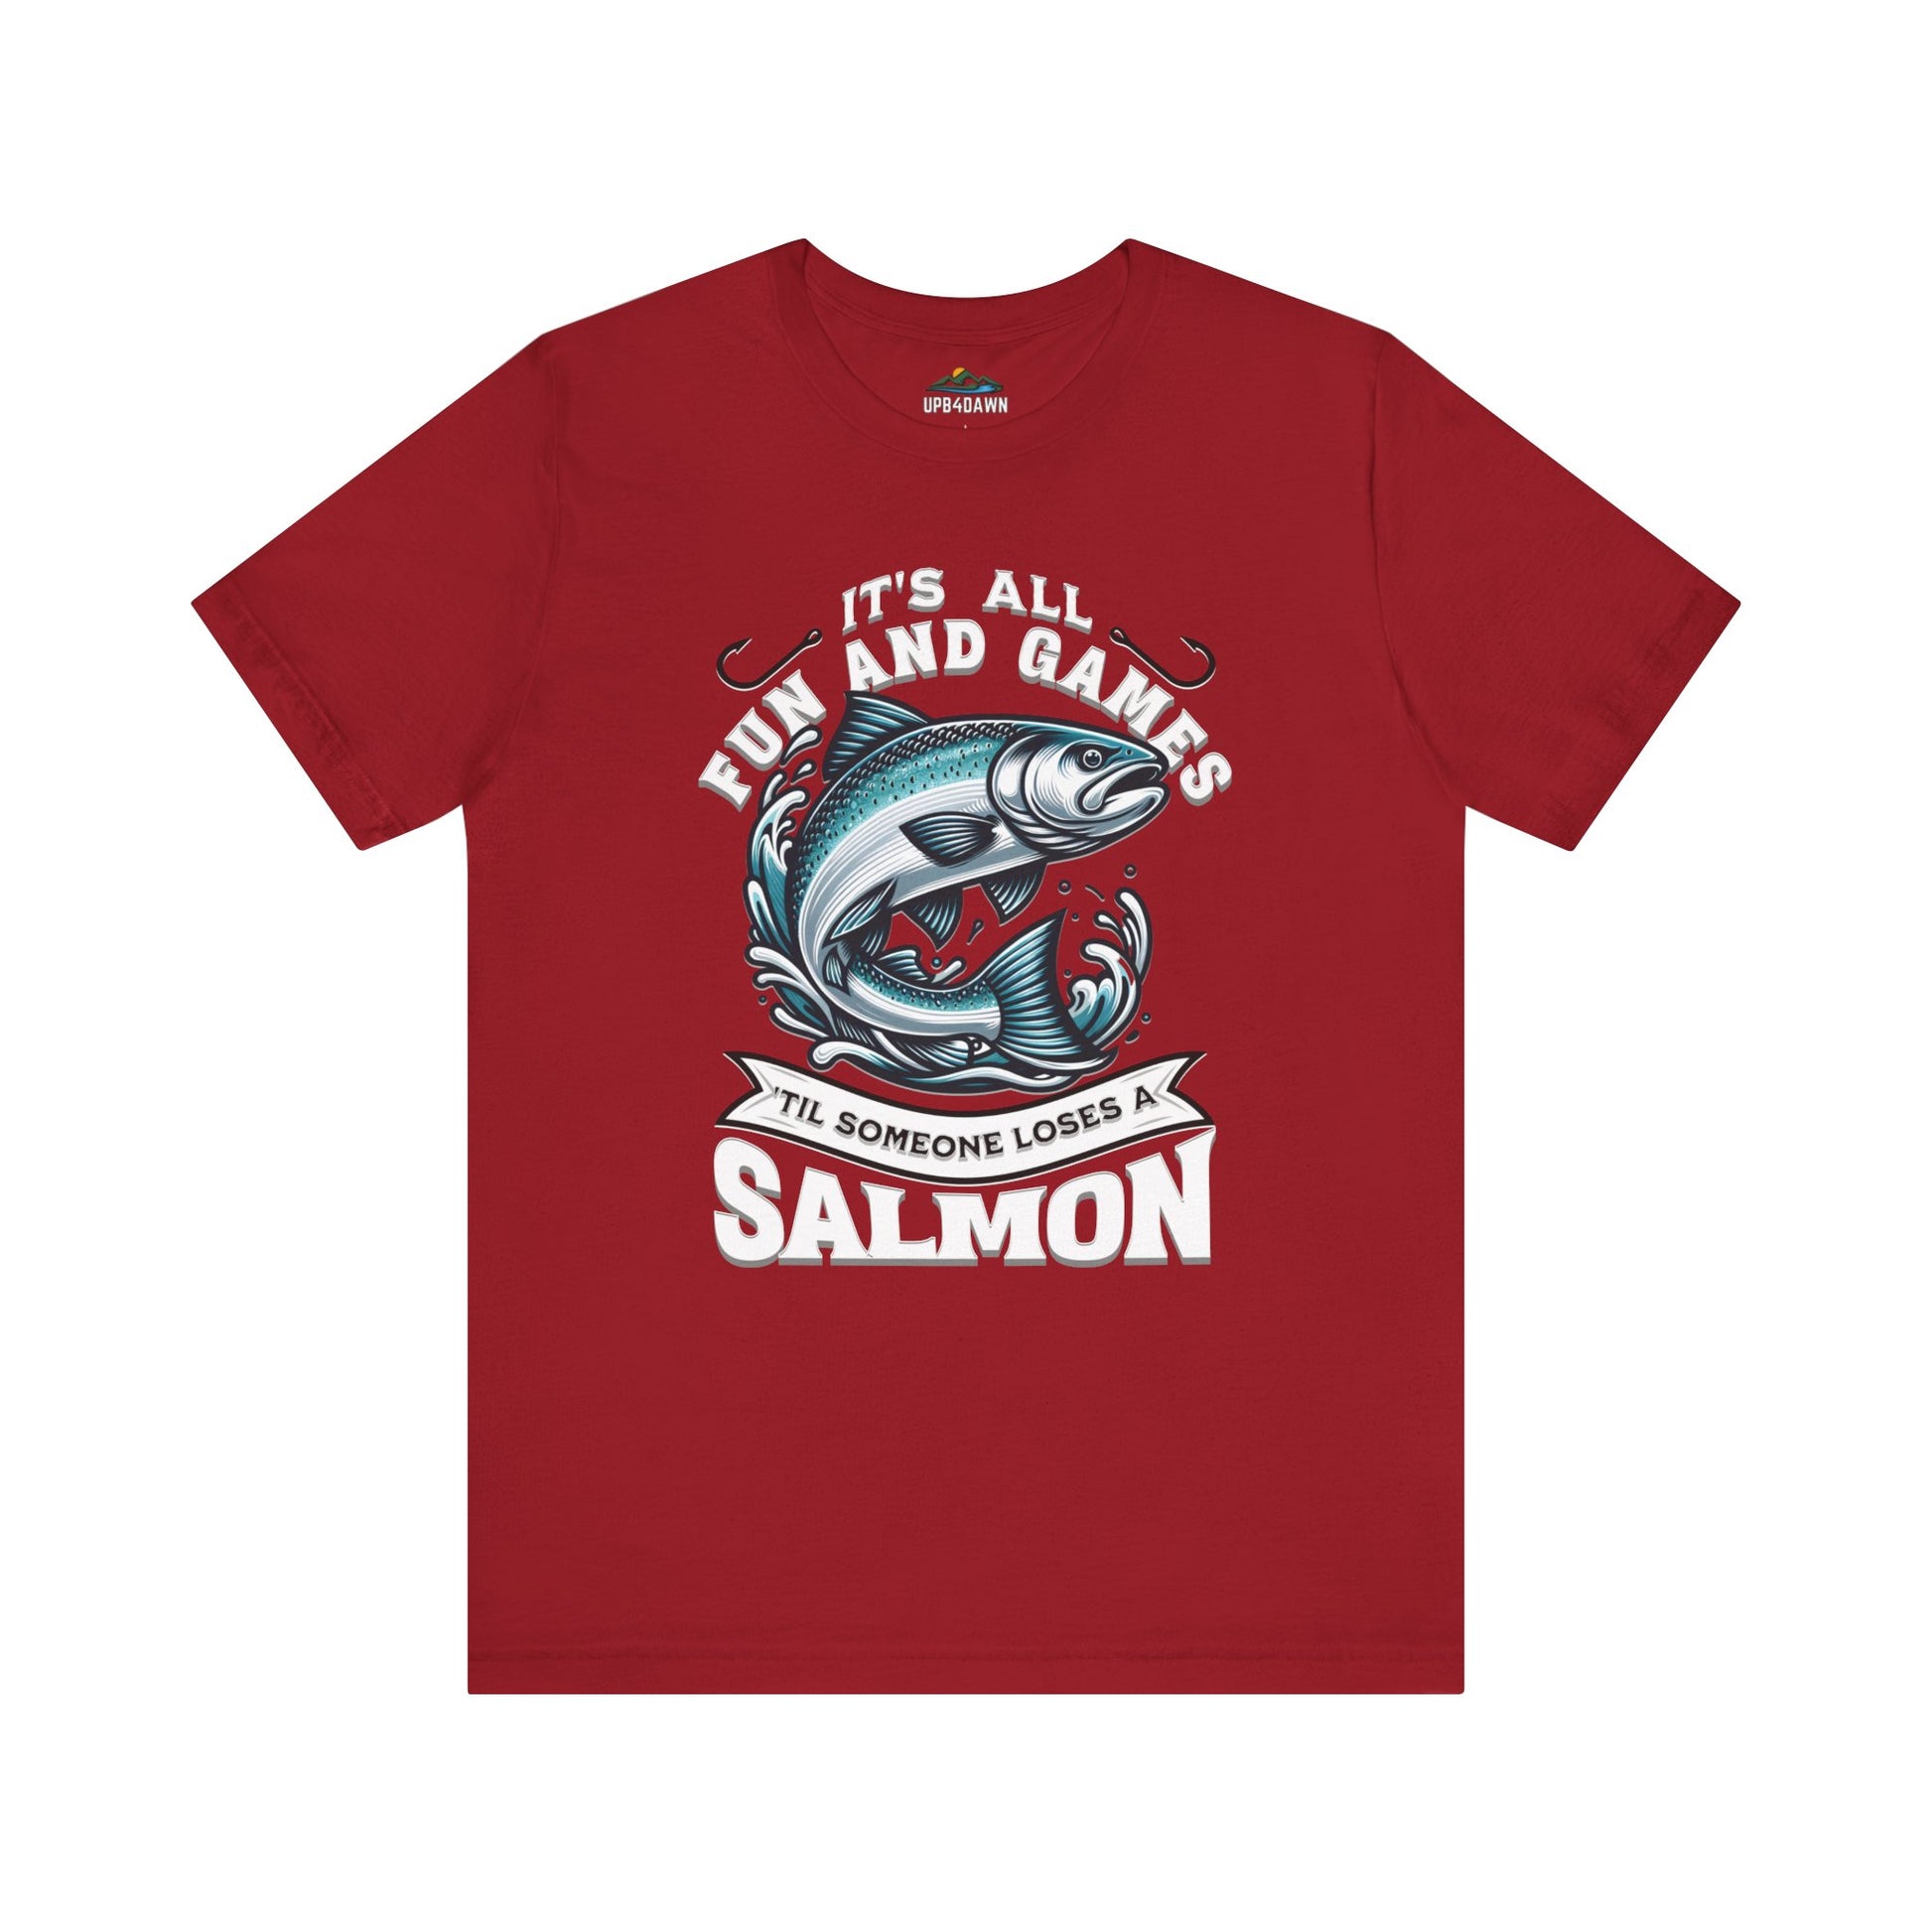 Navy blue "It's All Fun and Games Until Someone Loses a Salmon" t-shirt featuring a graphic with the phrase "it's all fun and games 'til someone loses a salmon" encircling an illustration of a large salmon leaping through water.